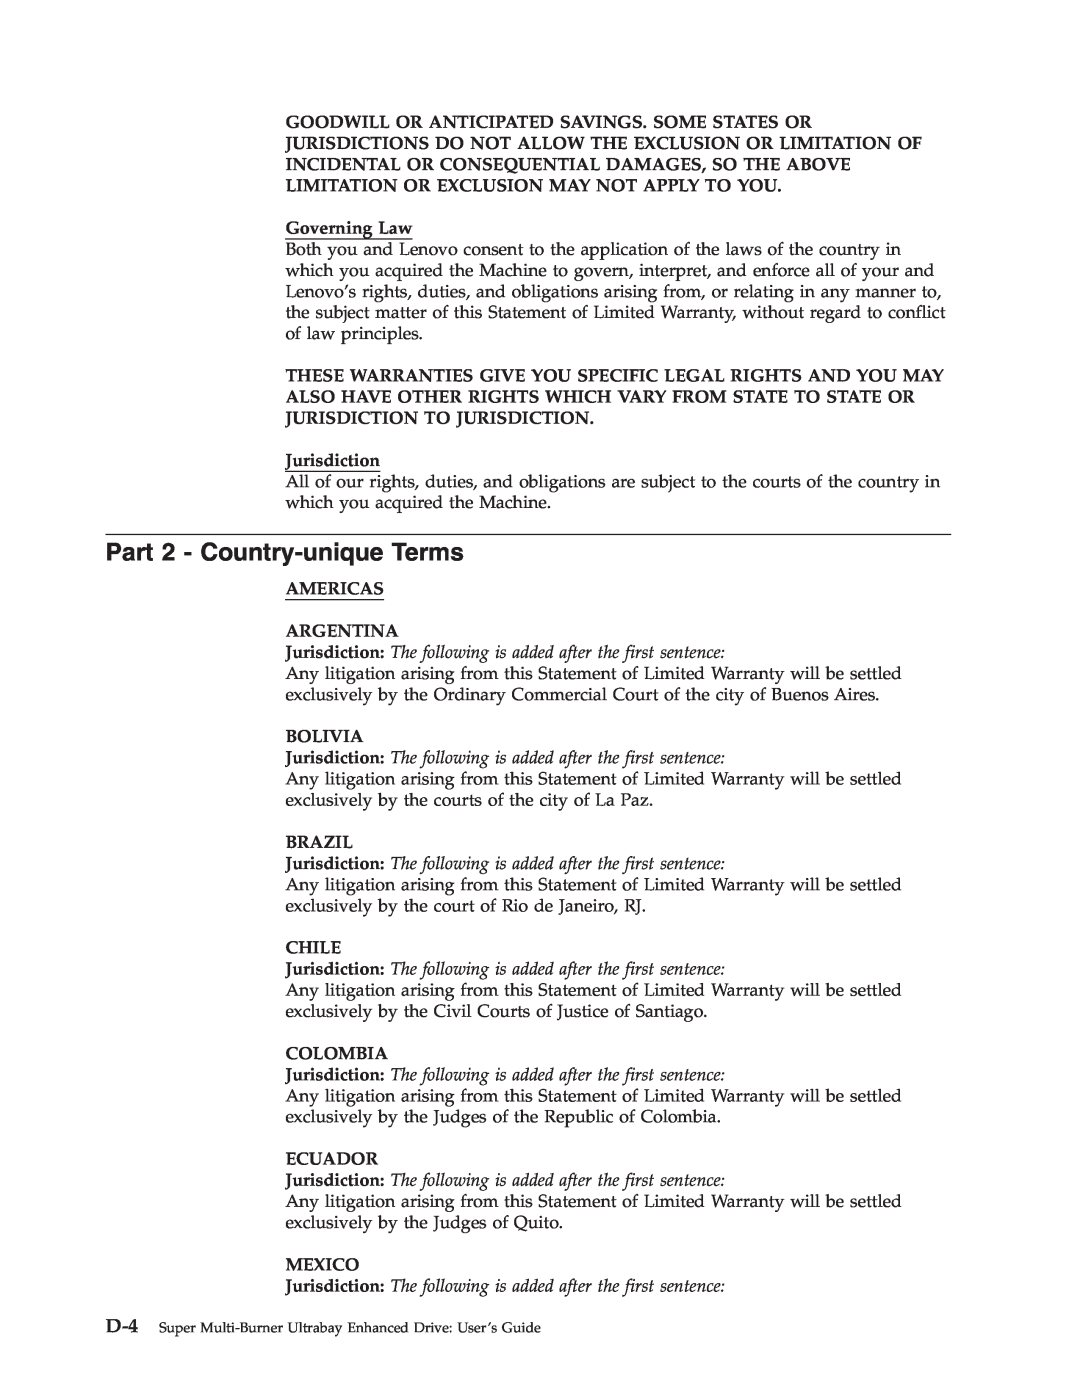 Lenovo 40Y8710 manual Part 2 - Country-uniqueTerms, Governing Law, Jurisdiction, Americas Argentina, Bolivia, Brazil, Chile 